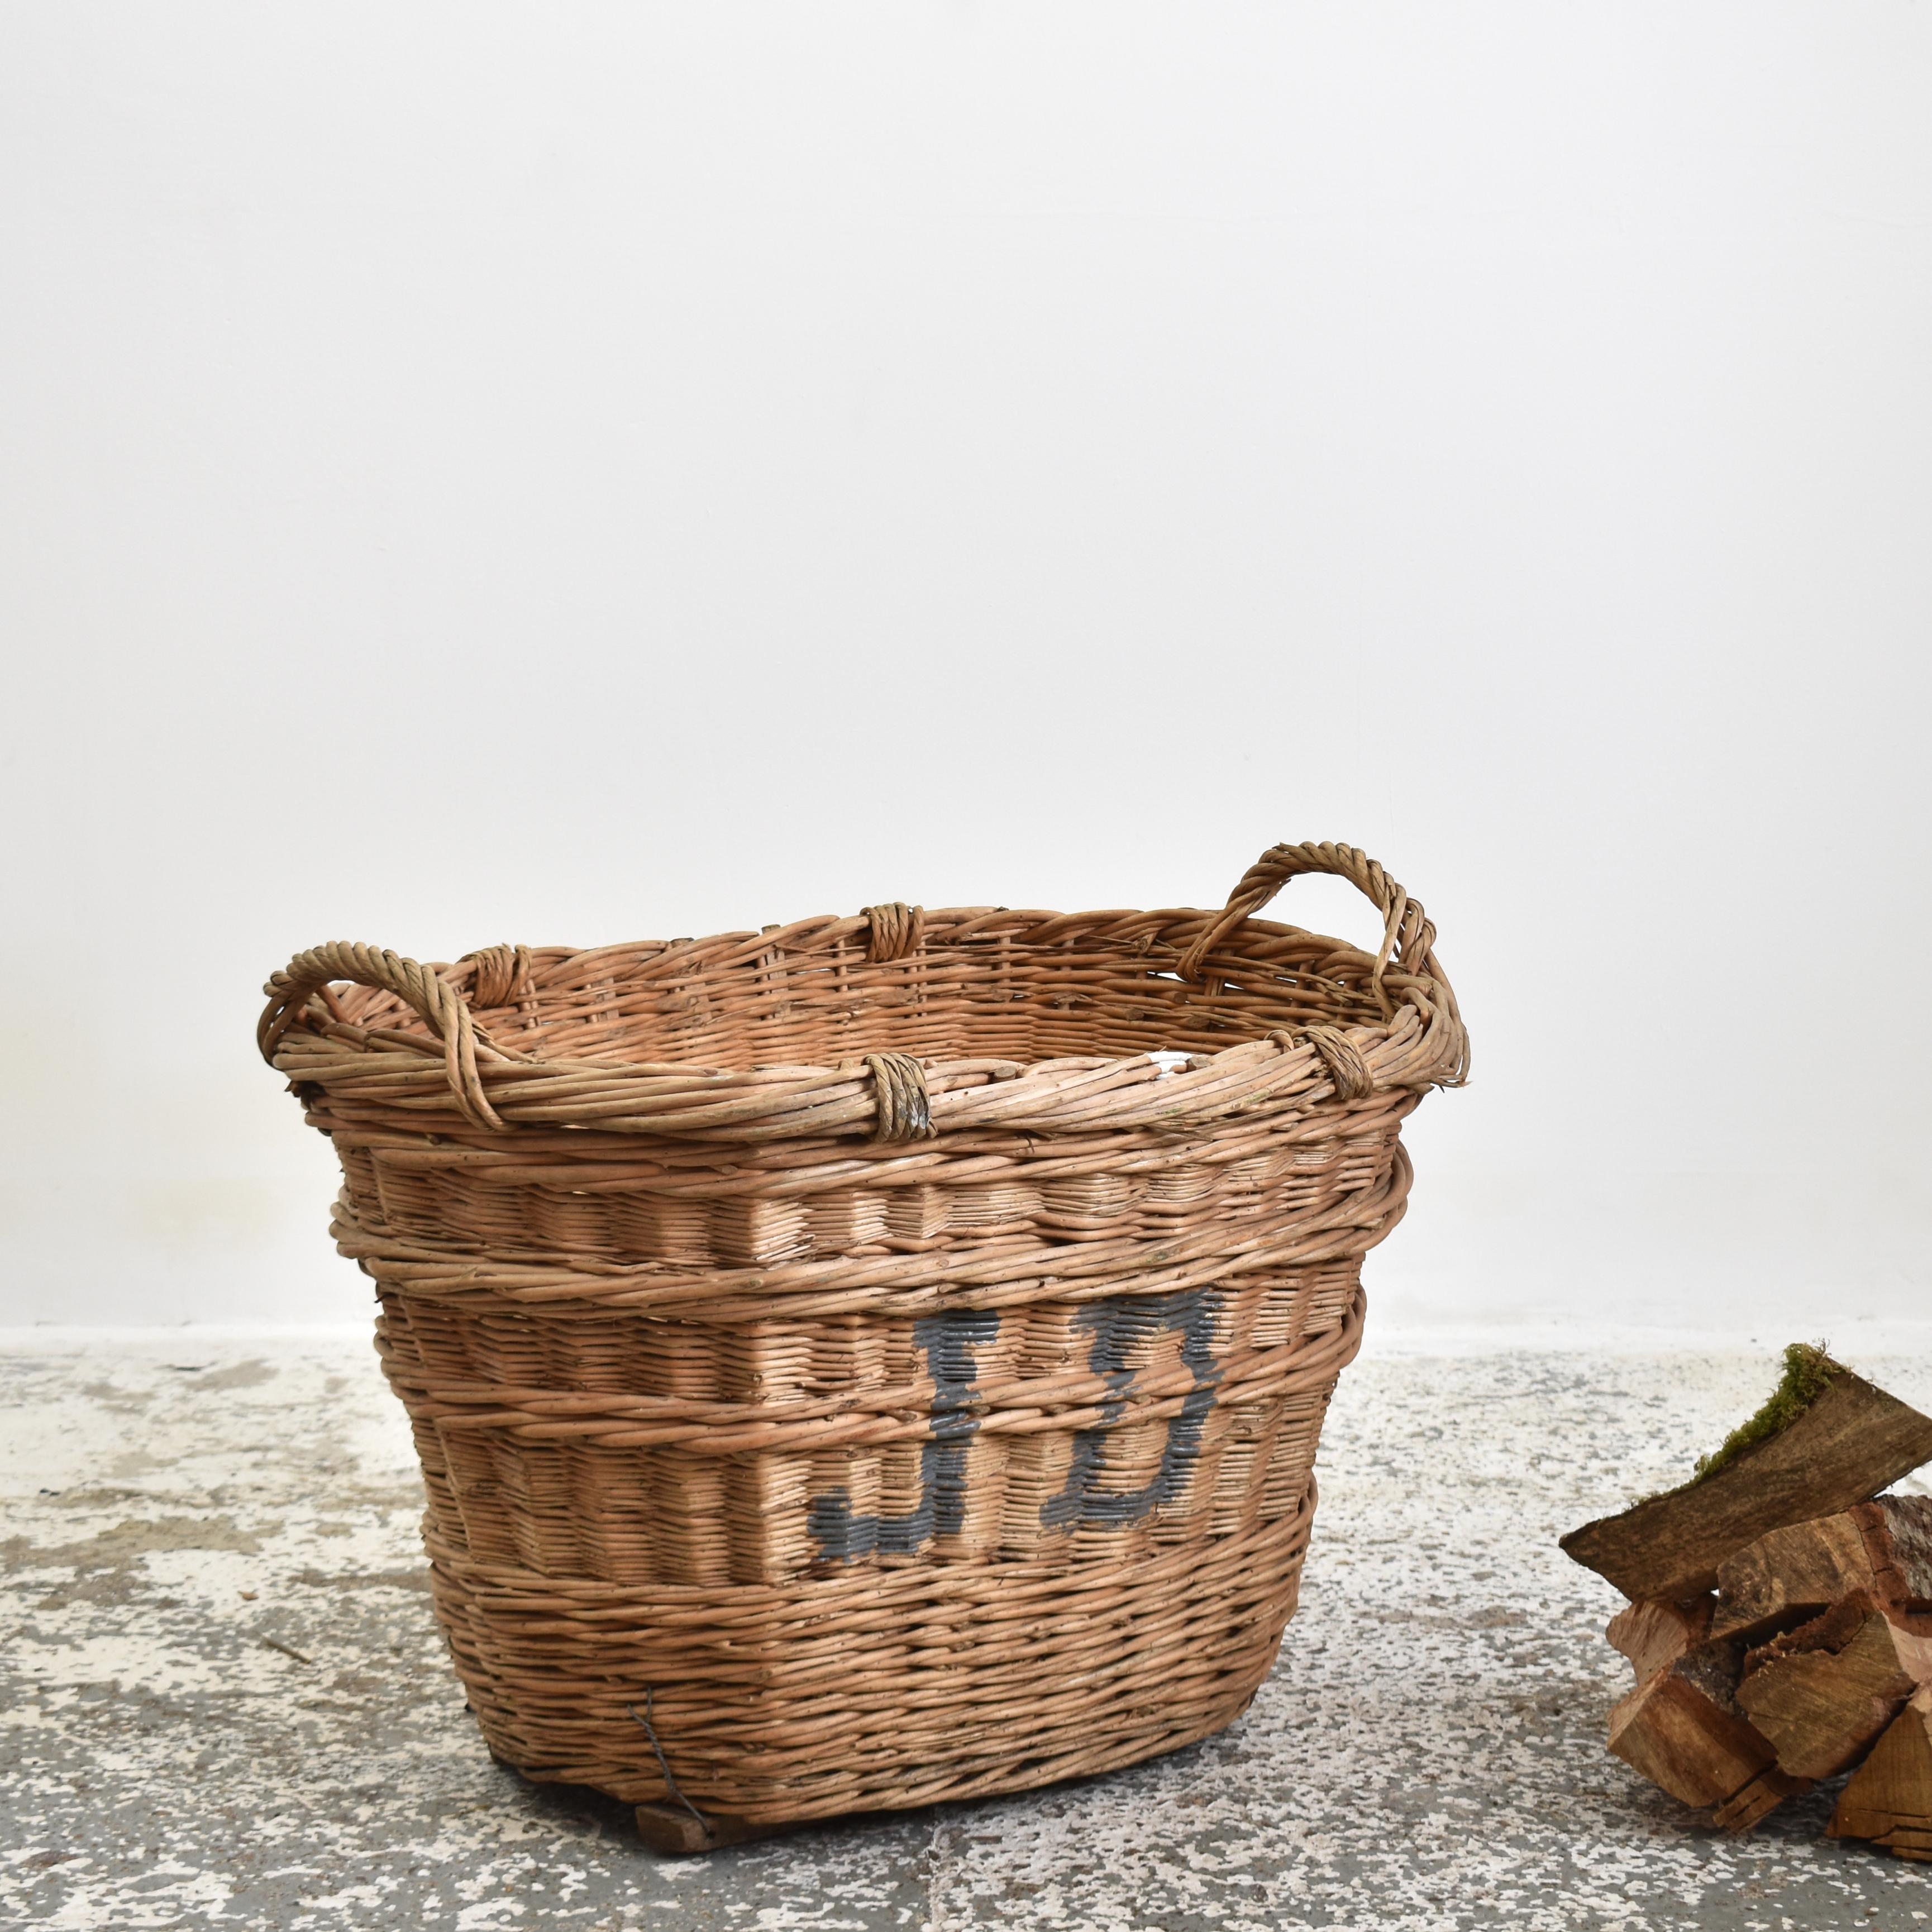 Large Antique Champagne Harvest Basket – L

A beautiful hand-made wicker champagne basket from France used to harvest grapes in the champagne region of Reims. The markings on the end identify the grower and vineyard it belonged to. The basket has